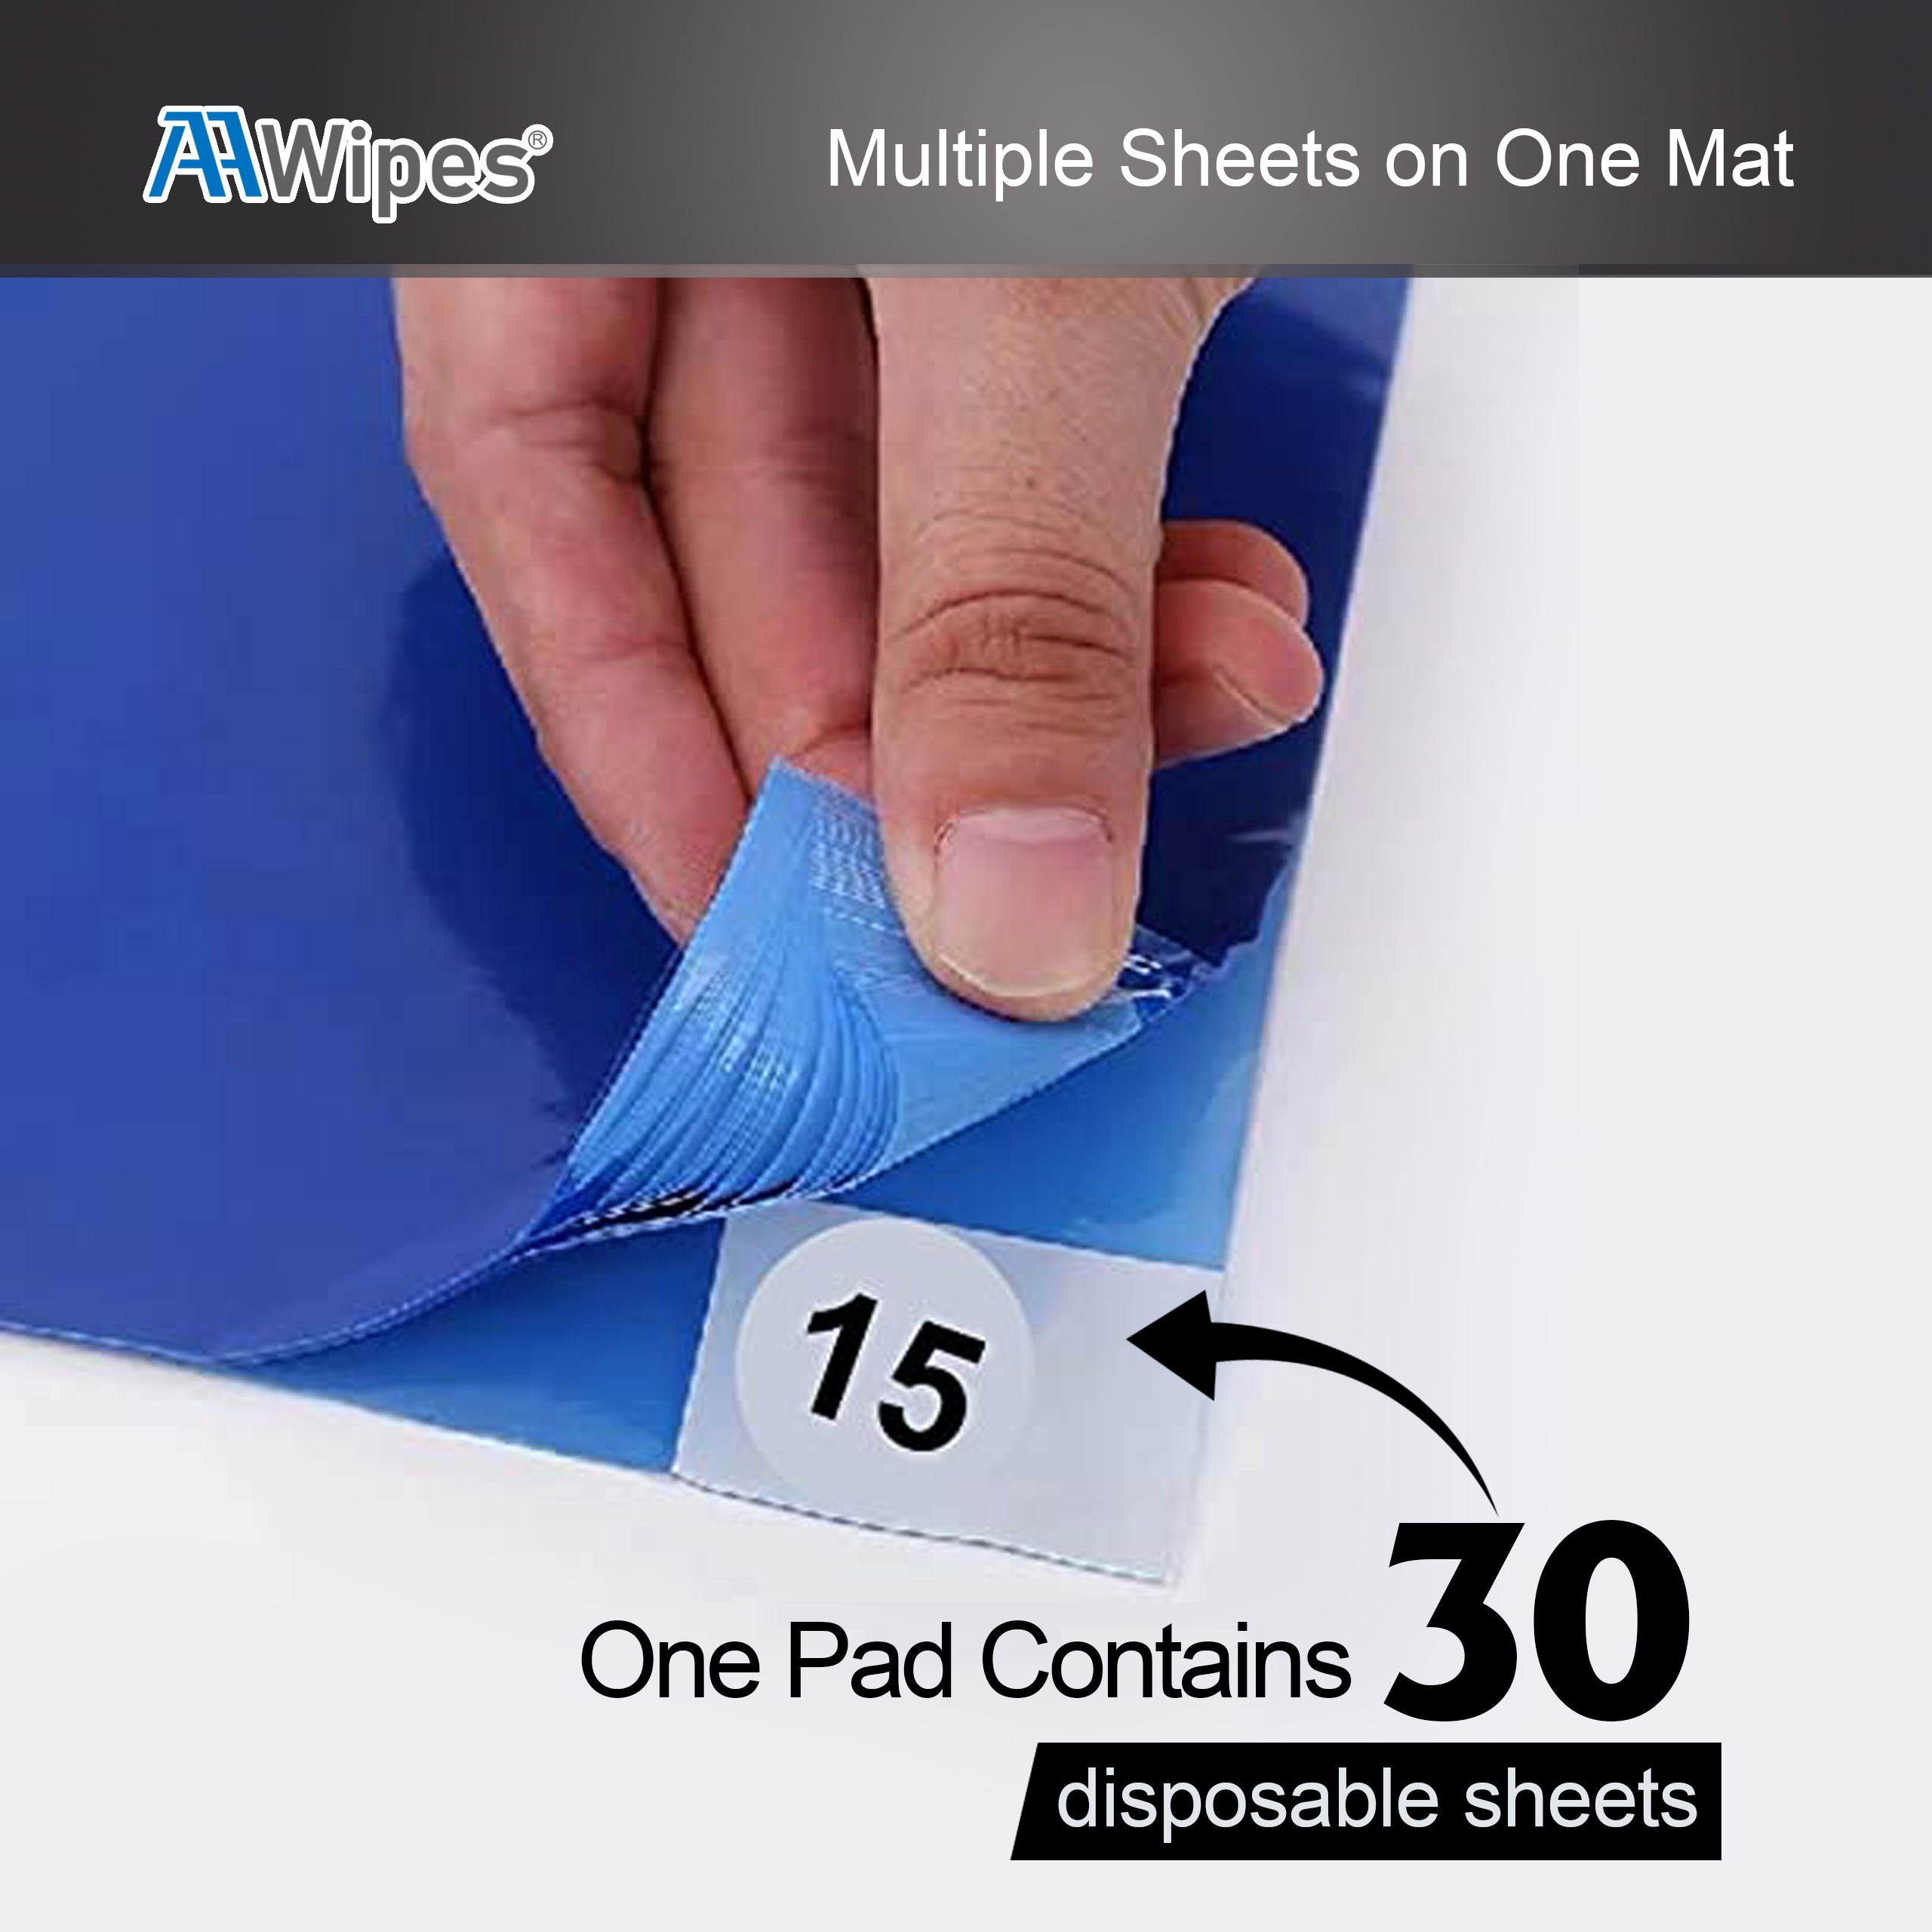 Cleanroom Sticky Floor Mats 24"X36" Blue for Microelectronics, Aerospace, Pharmaceuticals,Food Processing, Hospital, Health Care, Manufacturing, Semiconductor  (6,000 Sheets/200 Mats/20 Boxs/Case) (No. IPSM-2436-300-B)